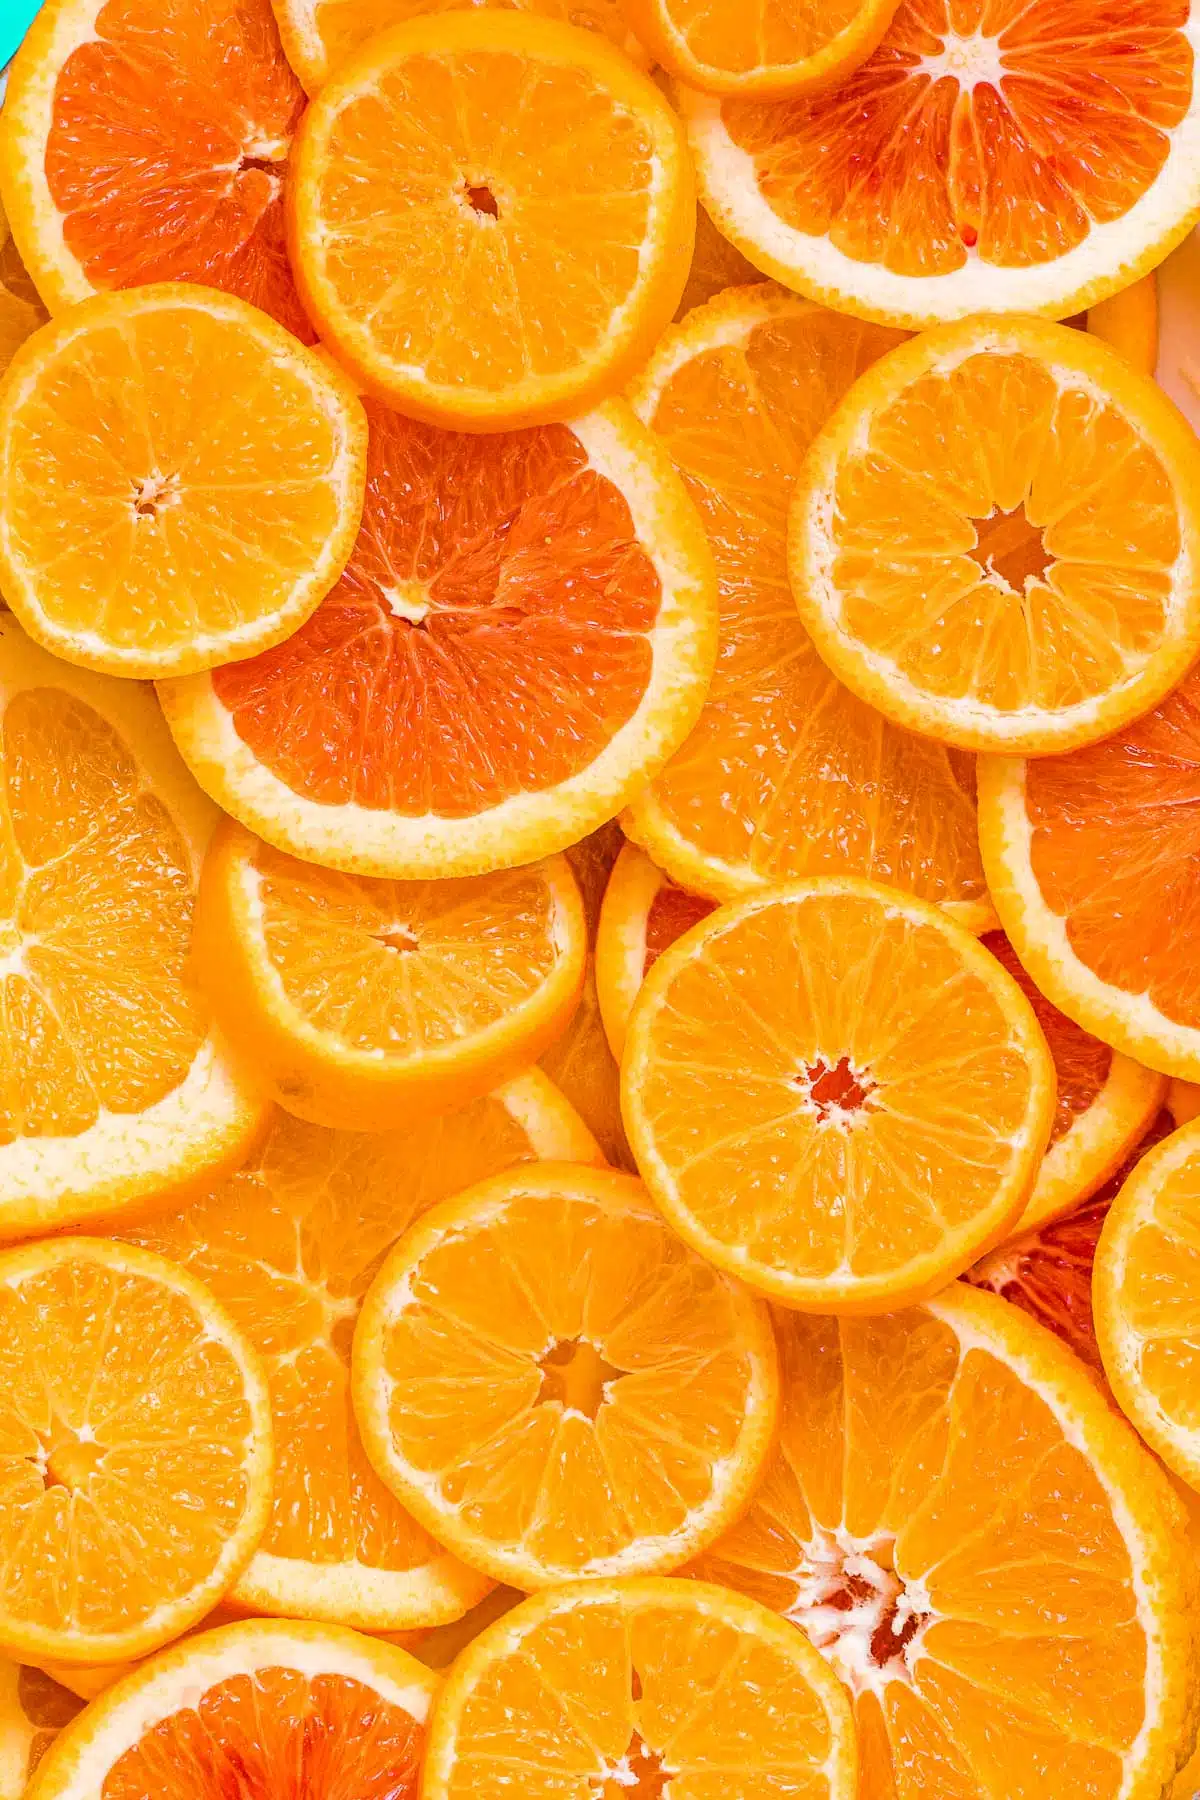 A variety of sliced oranges ready for dehydrating.